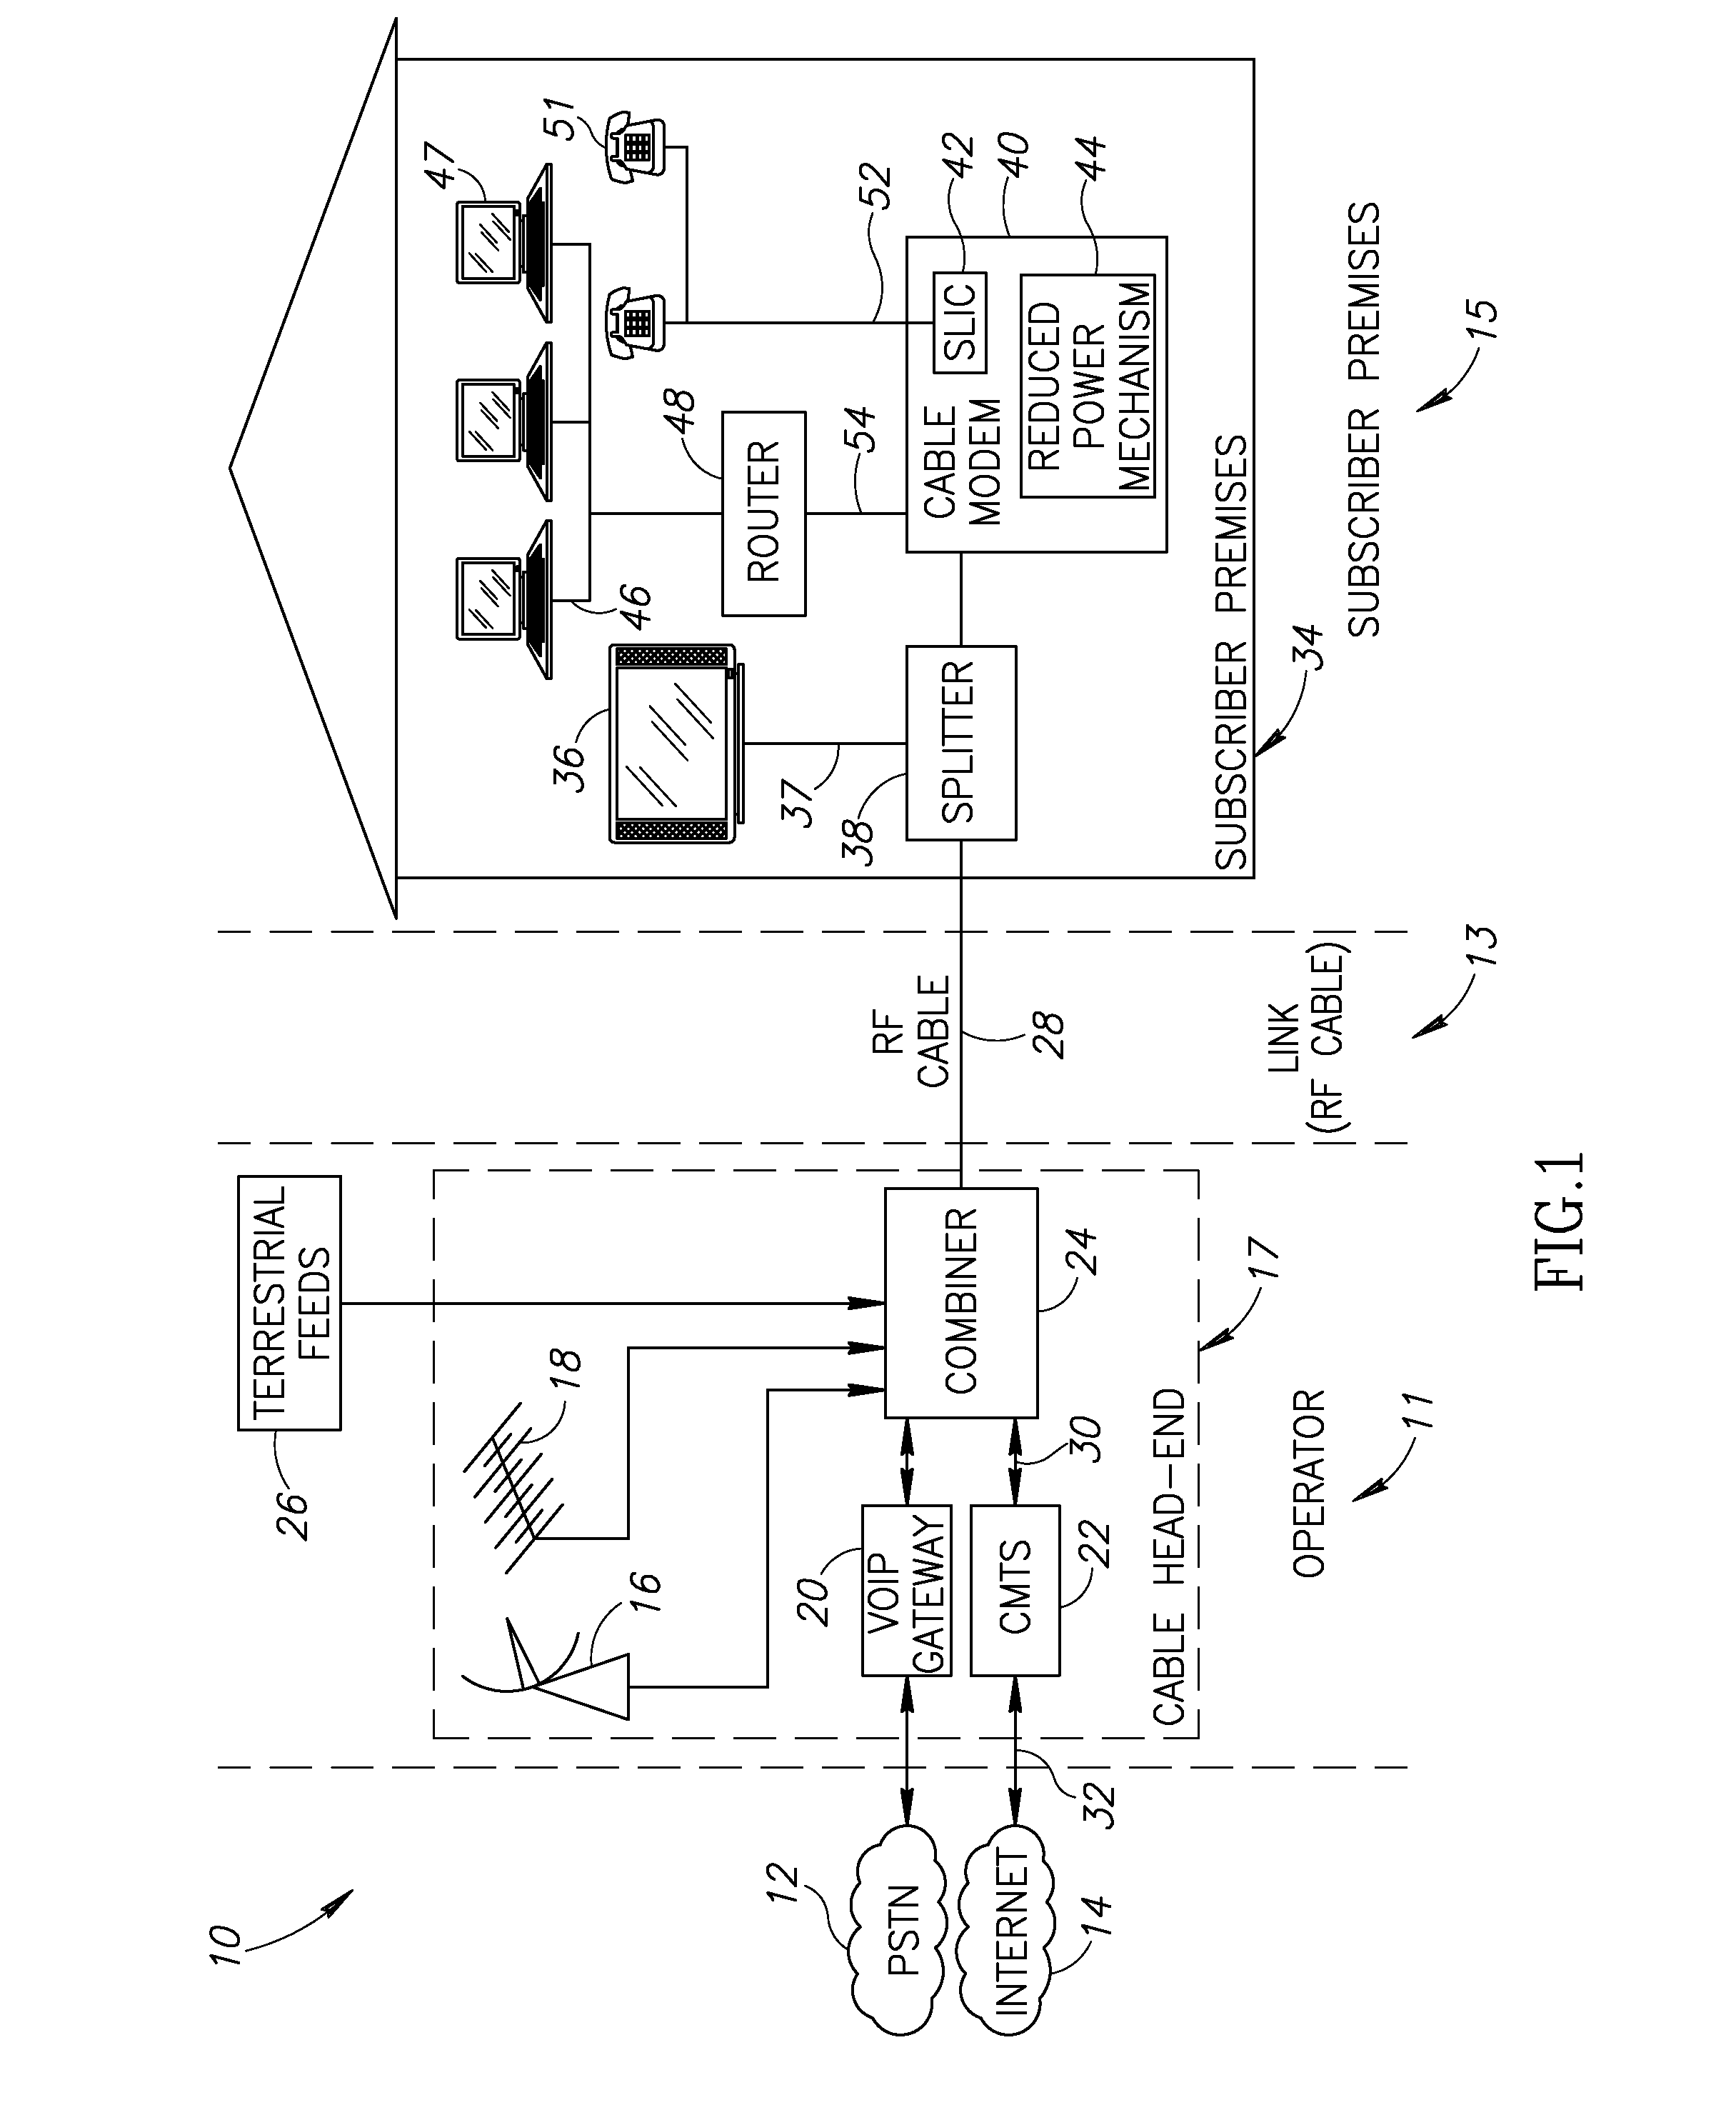 Apparatus for and method of reducing power consumption in a cable modem